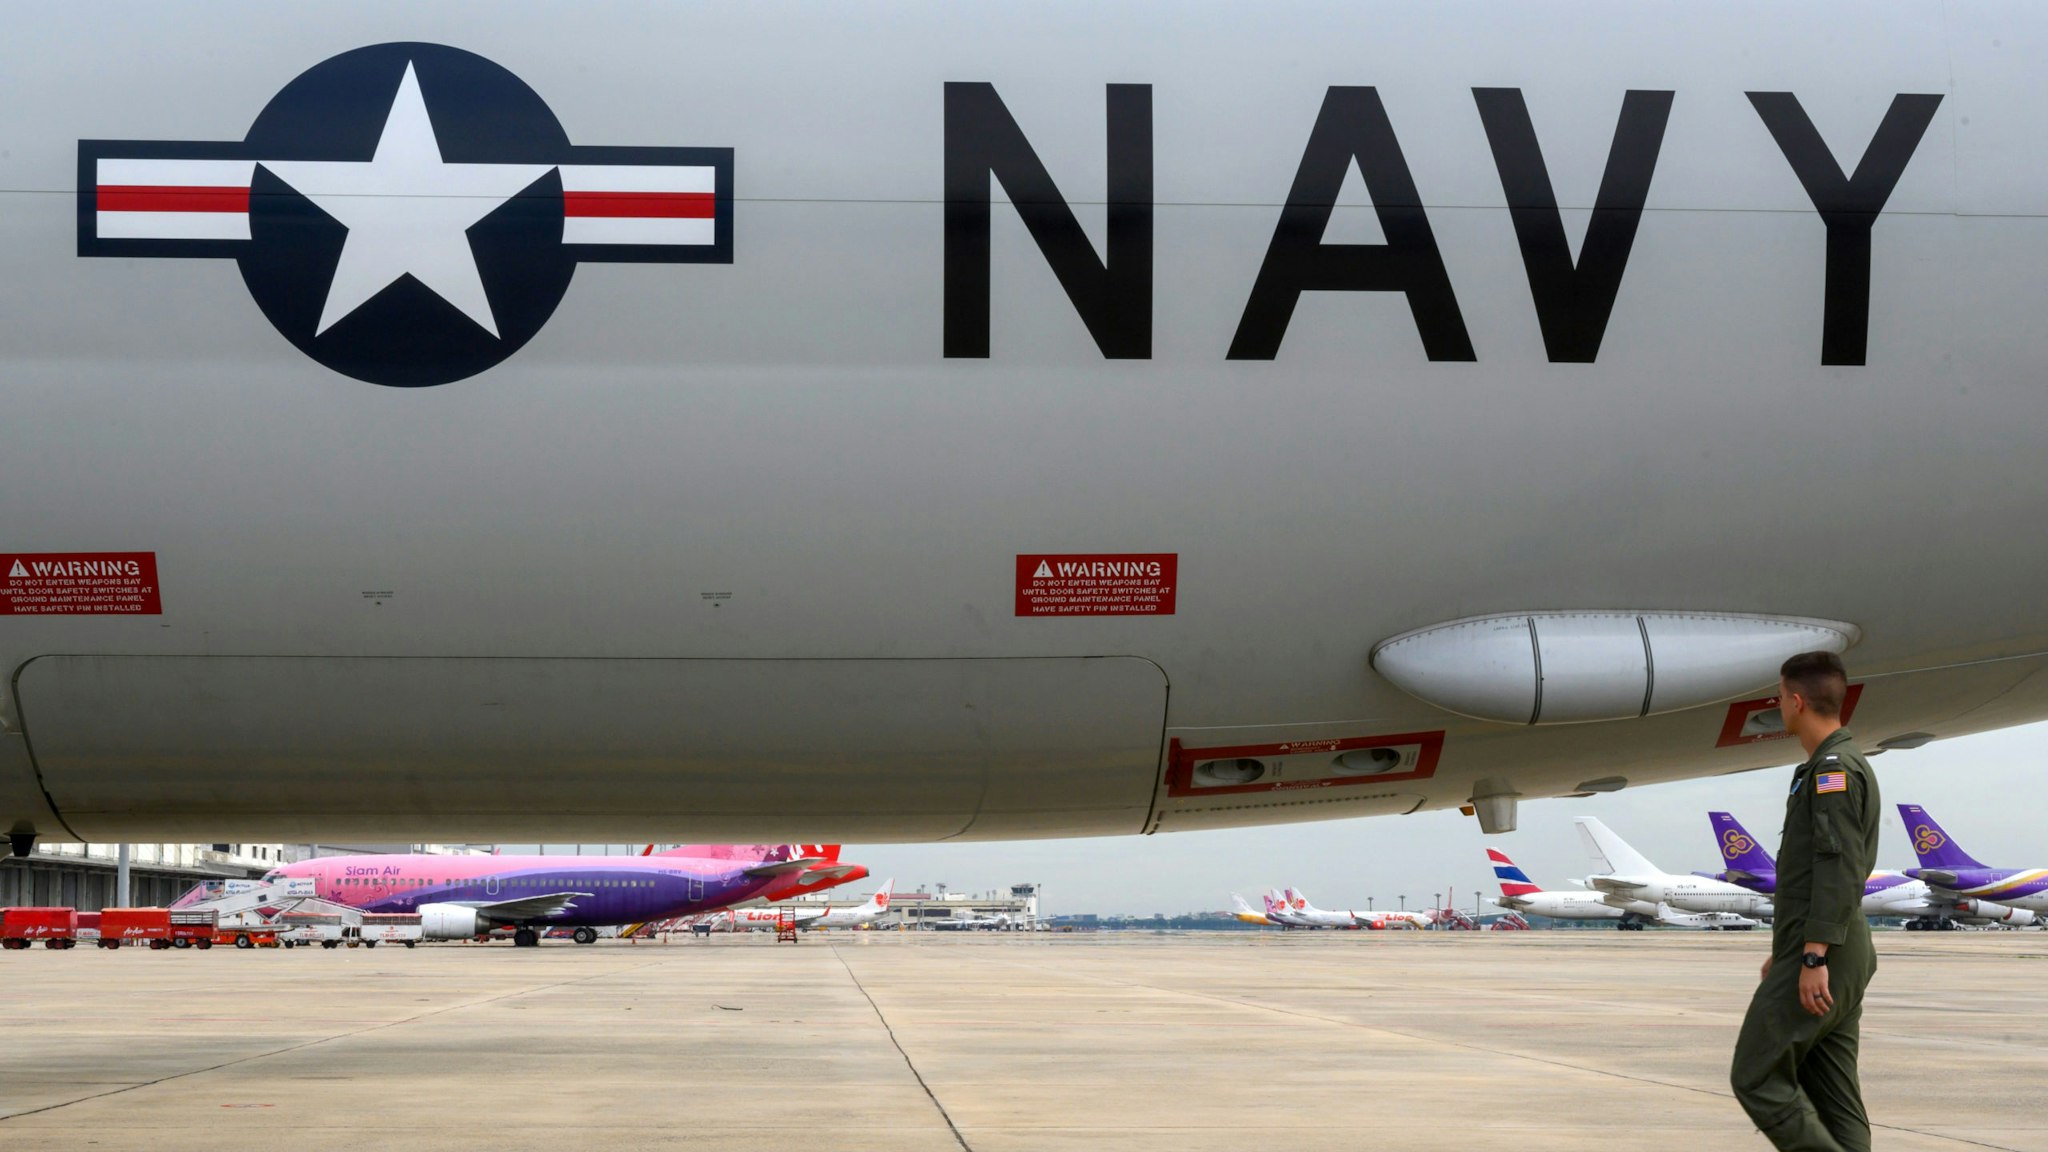 A US Navy aircrew member does a pre-flight walkaround for the P-8A Poseidon maritime patrol and reconnaissance aircraft during the US and Association of Southeast Asian Nations (ASEAN) maritime exercise in the Gulf of Thailand on September 5, 2019.